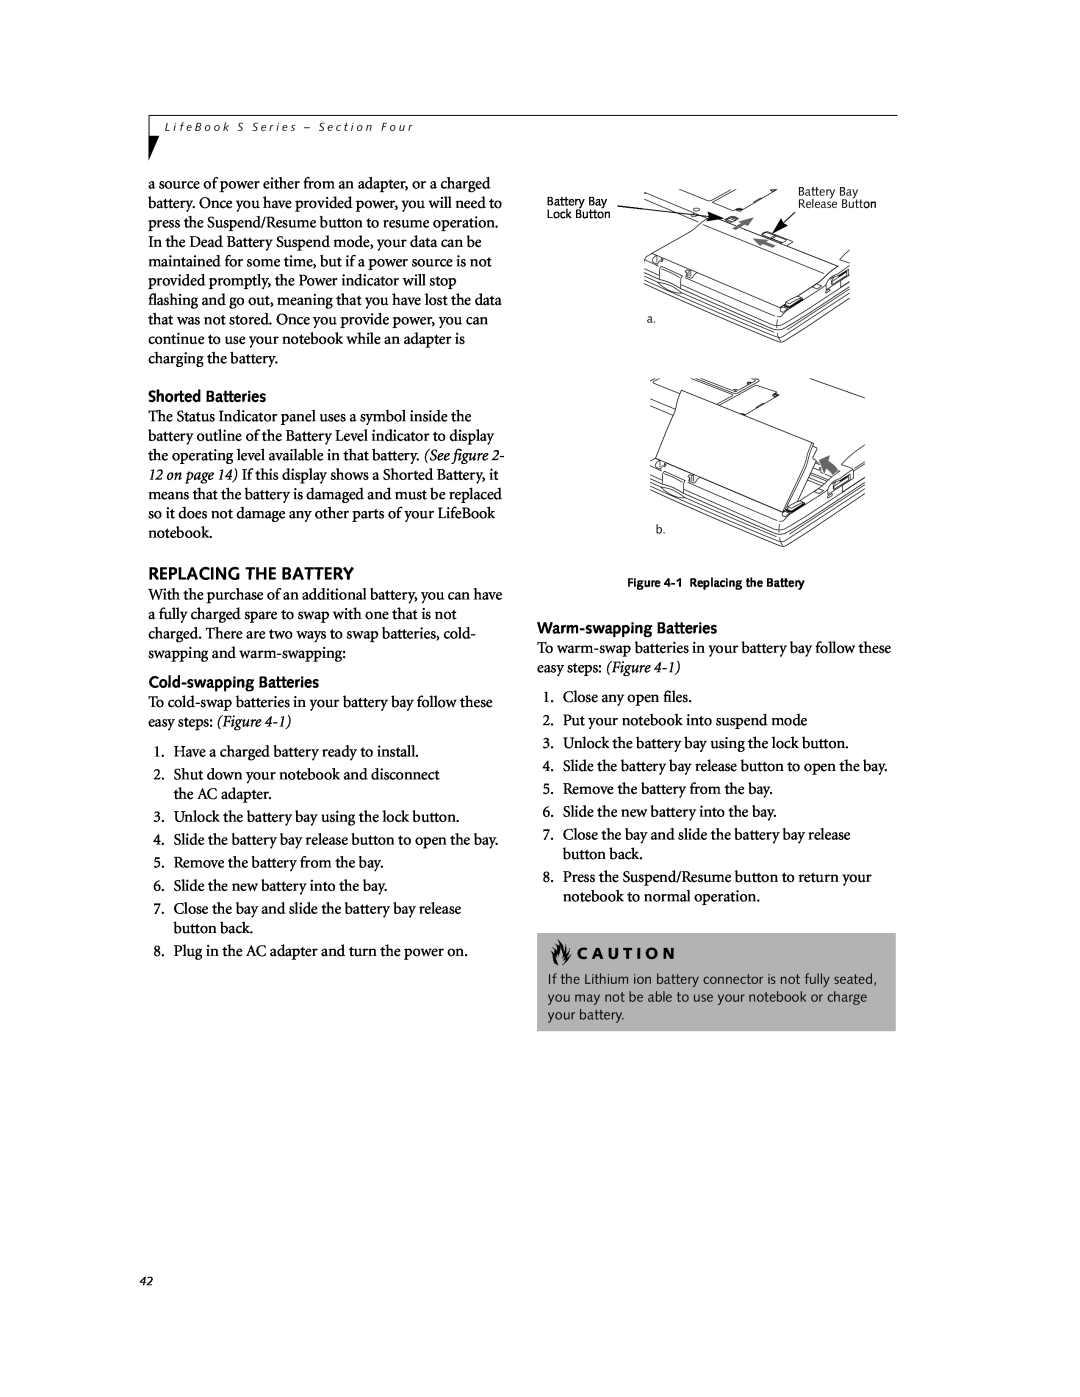 Fujitsu DVD Player manual Replacing The Battery, Shorted Batteries, Cold-swapping Batteries, Warm-swapping Batteries 